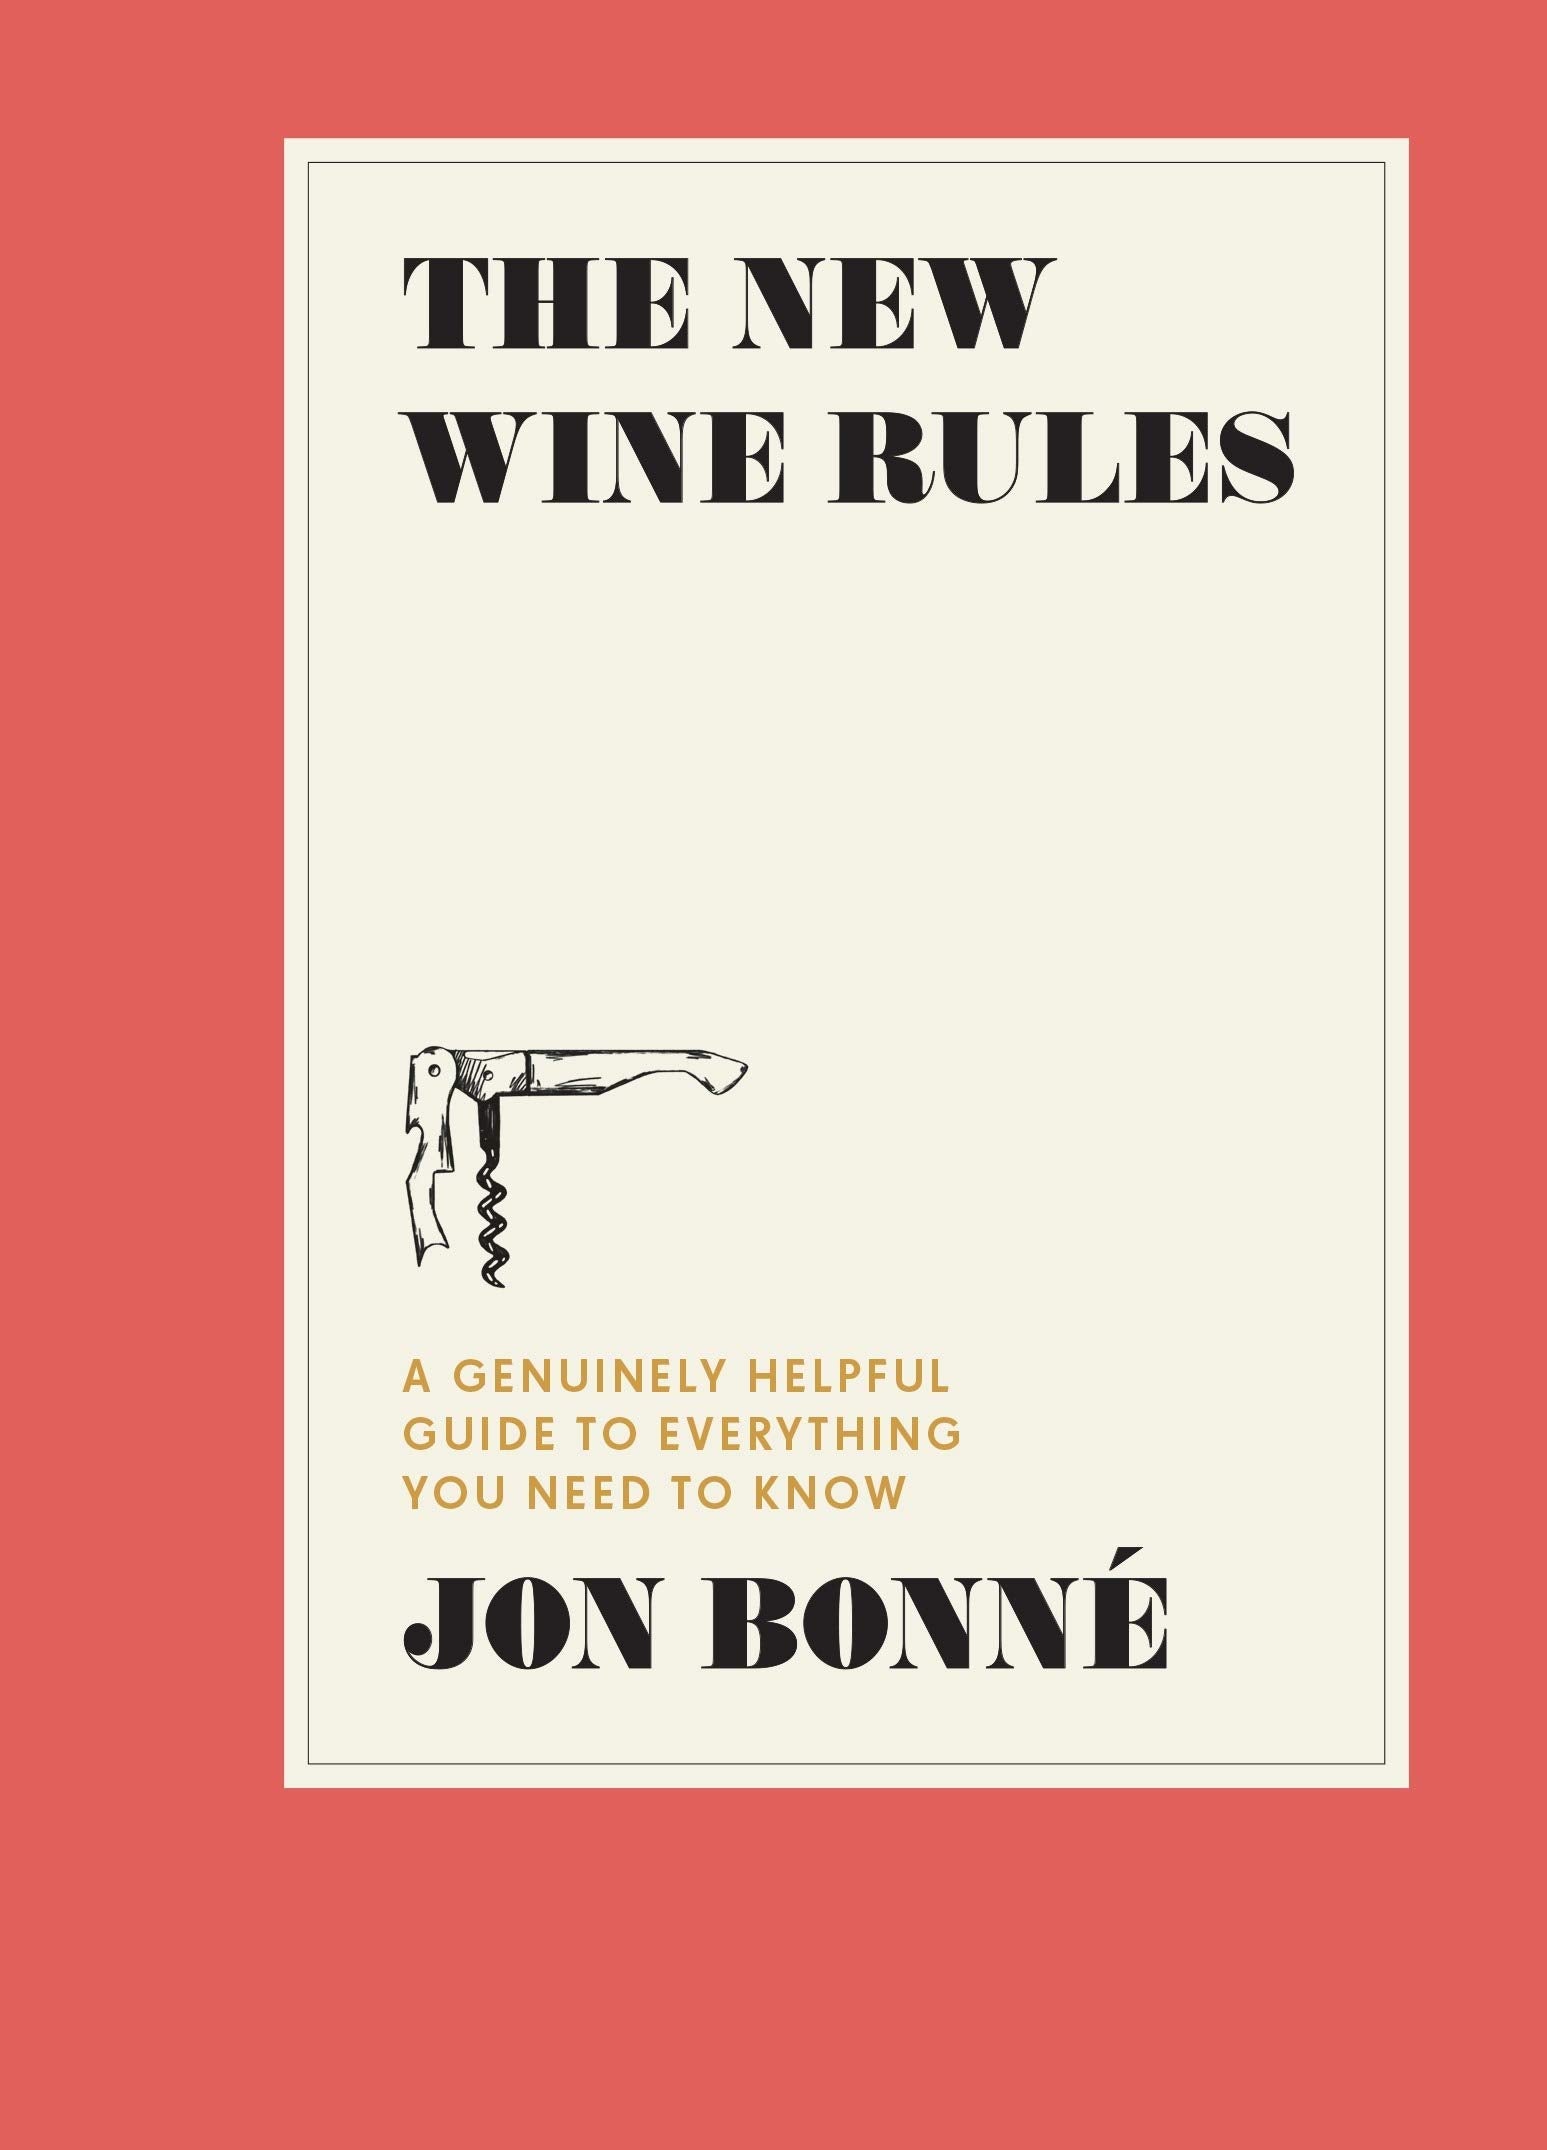 The New Wine Rules: A Genuinely Helpful Guide to Everything You Need to Know (Jon Bonne) *Signed*